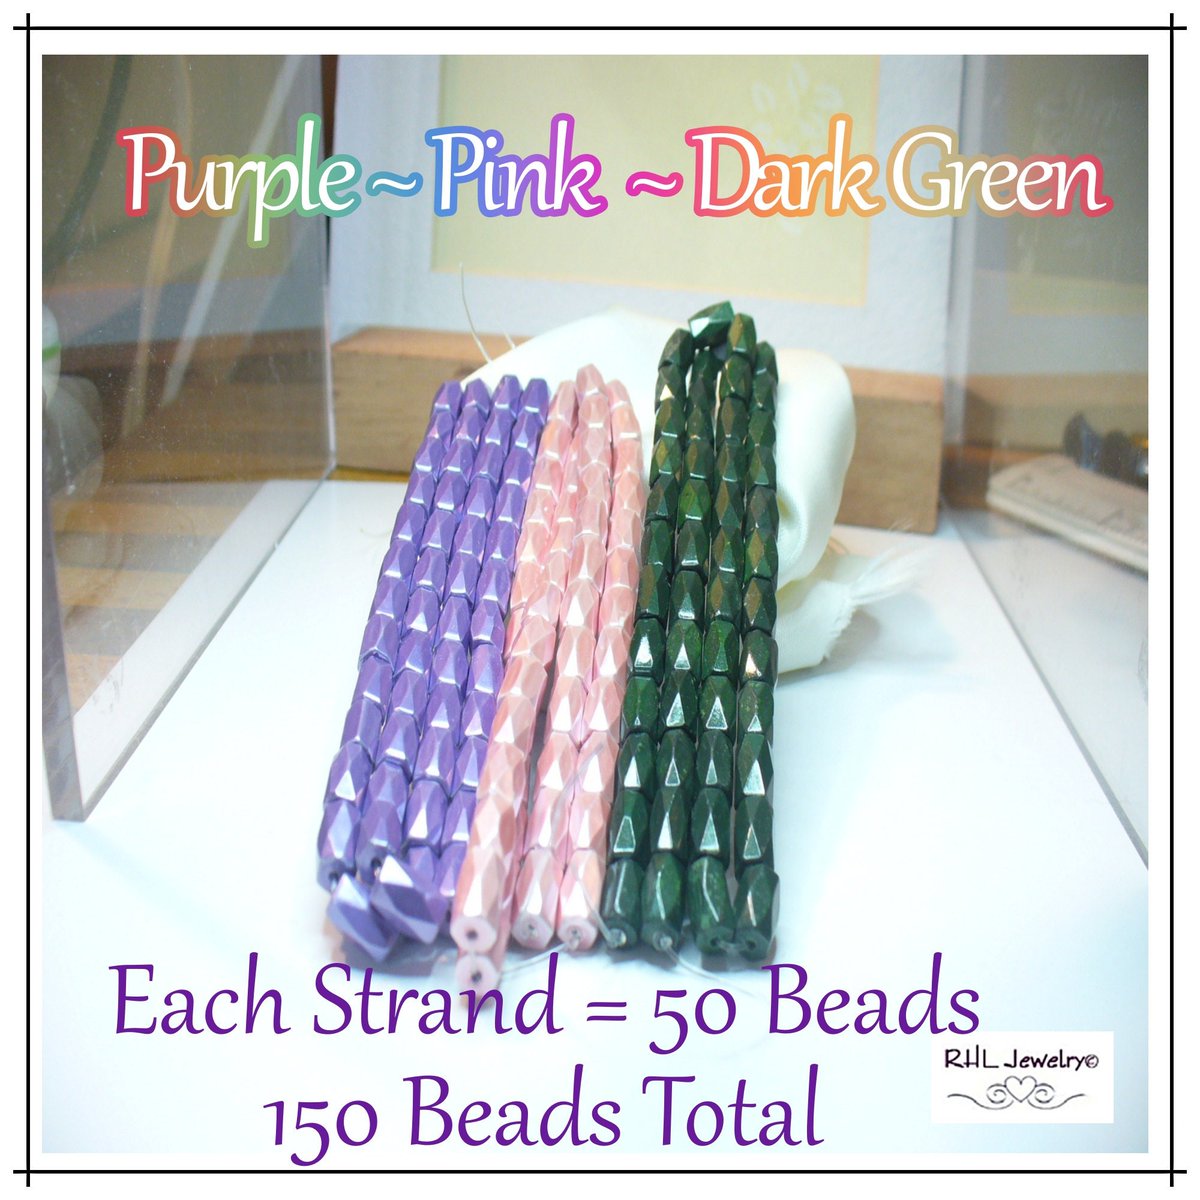 Beading Supplies, Colorful Magnetic Beads, Bead Strands, Magnetic Beads, Purple Beads, Pink Beads, Green Beads 3 Strands, S-90 tuppu.net/740585ea ##chakra #etsygifts #NewOldStock